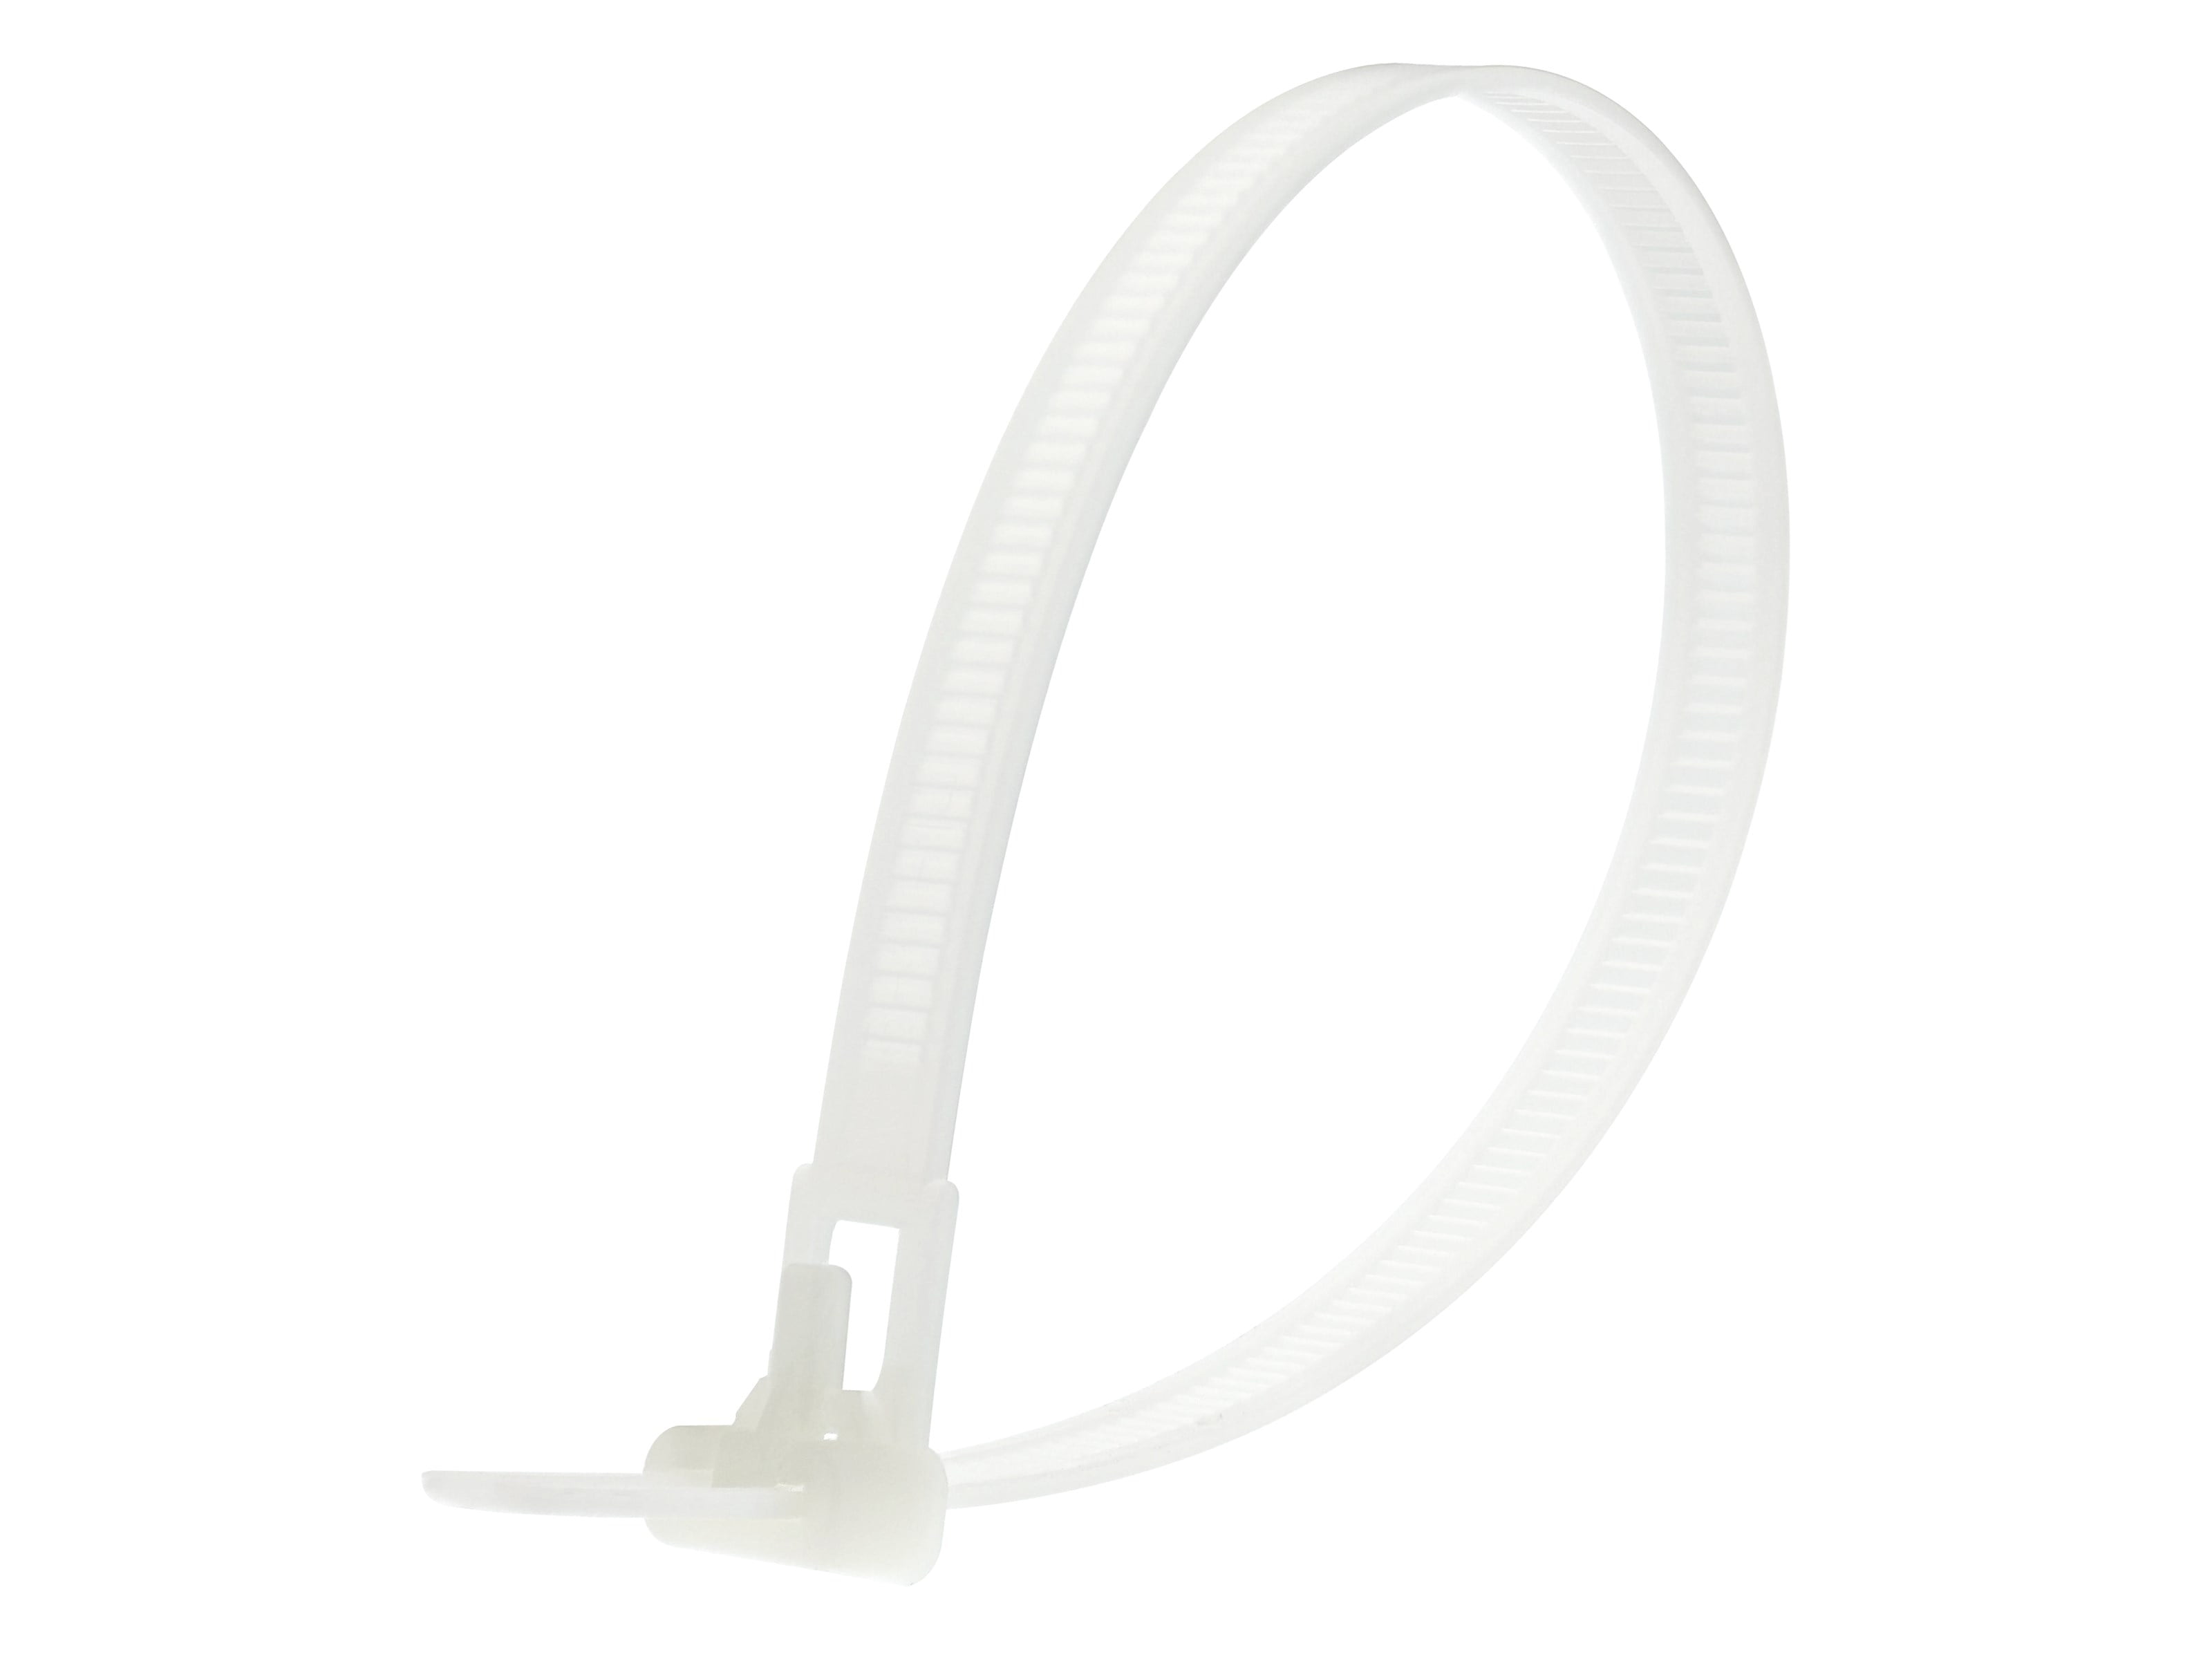 GIFT 100 Pack 10 Inch Self Locking Zip Ties Nylon Cable Ties White The UK Selle 